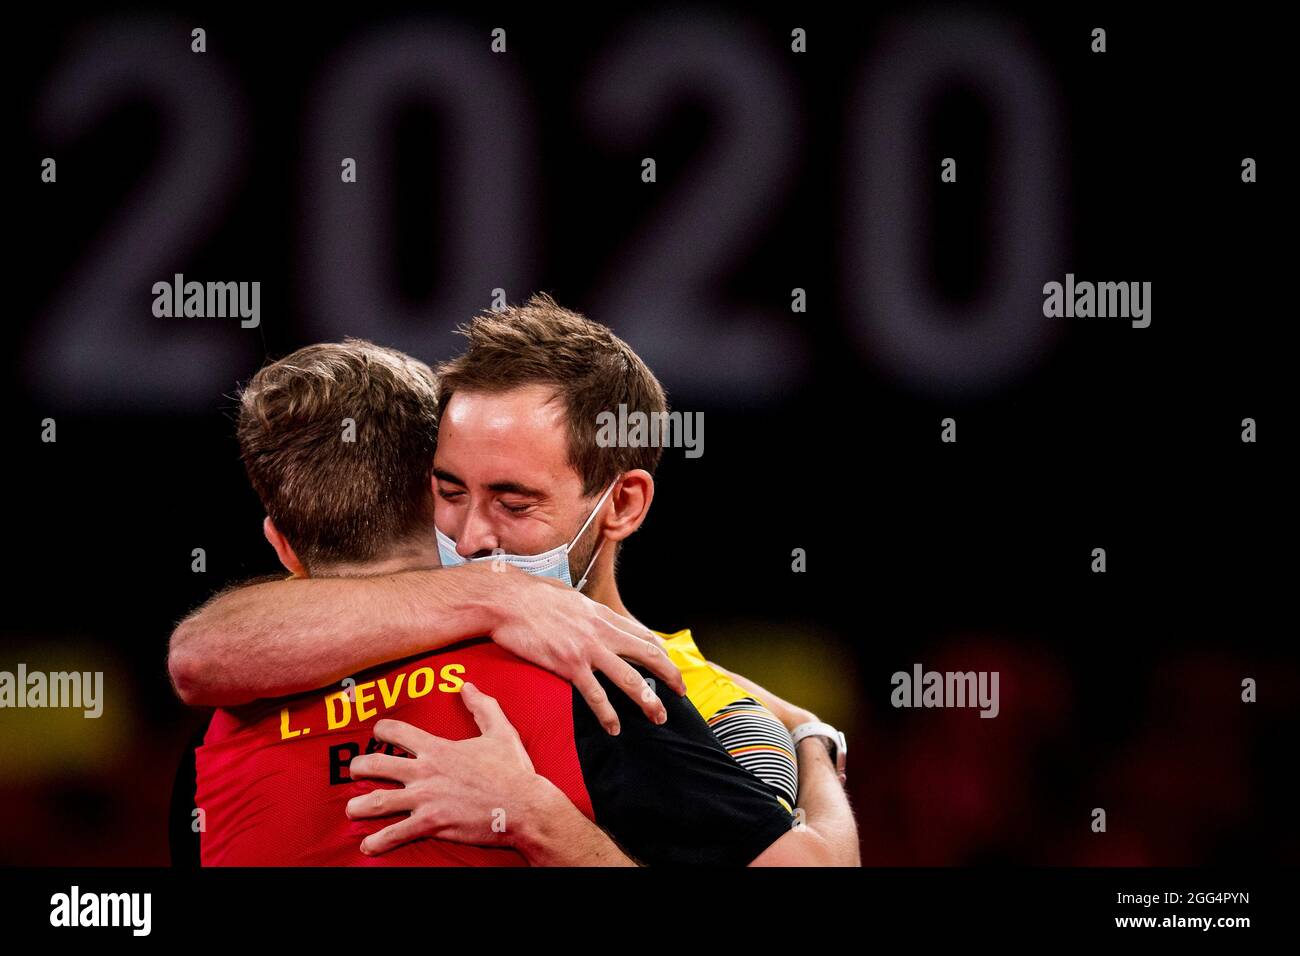 Belgian table tennis player Laurens Devos and Carlo Agnello celebrates  after winning a table tennis game between Belgian Laurens Devos and  Australian Stock Photo - Alamy